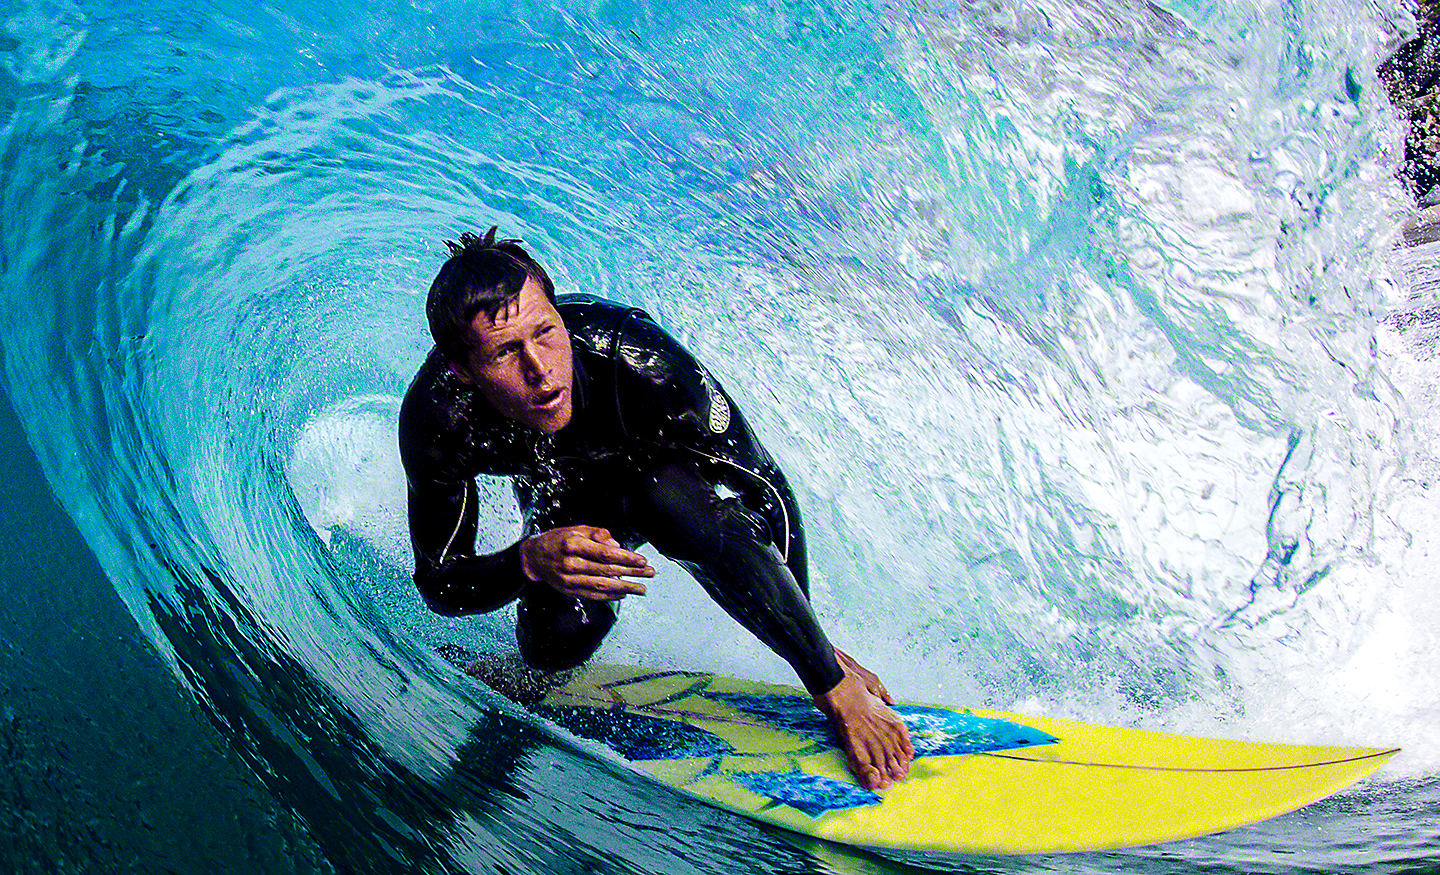 Image of a surfer riding a wave